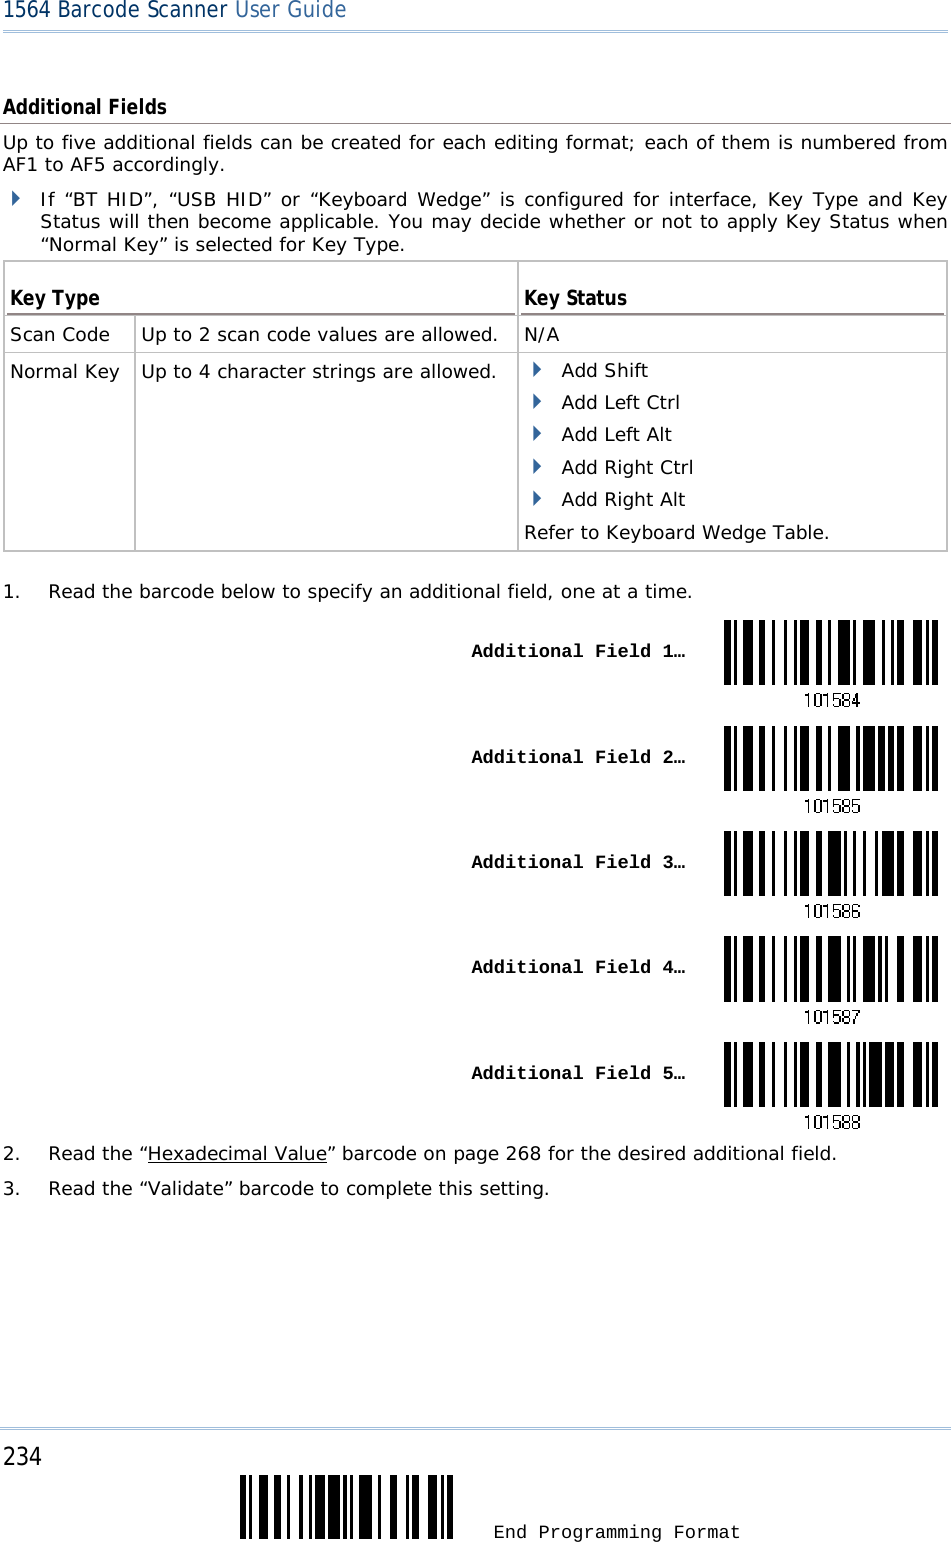 234  End Programming Format 1564 Barcode Scanner User Guide  Additional Fields Up to five additional fields can be created for each editing format; each of them is numbered from AF1 to AF5 accordingly.  If “BT HID”, “USB HID” or “Keyboard Wedge” is configured for interface, Key Type and Key Status will then become applicable. You may decide whether or not to apply Key Status when “Normal Key” is selected for Key Type.  Key Type  Key Status Scan Code   Up to 2 scan code values are allowed. N/A Normal Key   Up to 4 character strings are allowed.   Add Shift  Add Left Ctrl  Add Left Alt  Add Right Ctrl  Add Right Alt Refer to Keyboard Wedge Table.   1.  Read the barcode below to specify an additional field, one at a time.  Additional Field 1… Additional Field 2… Additional Field 3… Additional Field 4… Additional Field 5…2.  Read the “Hexadecimal Value” barcode on page 268 for the desired additional field. 3.  Read the “Validate” barcode to complete this setting.     